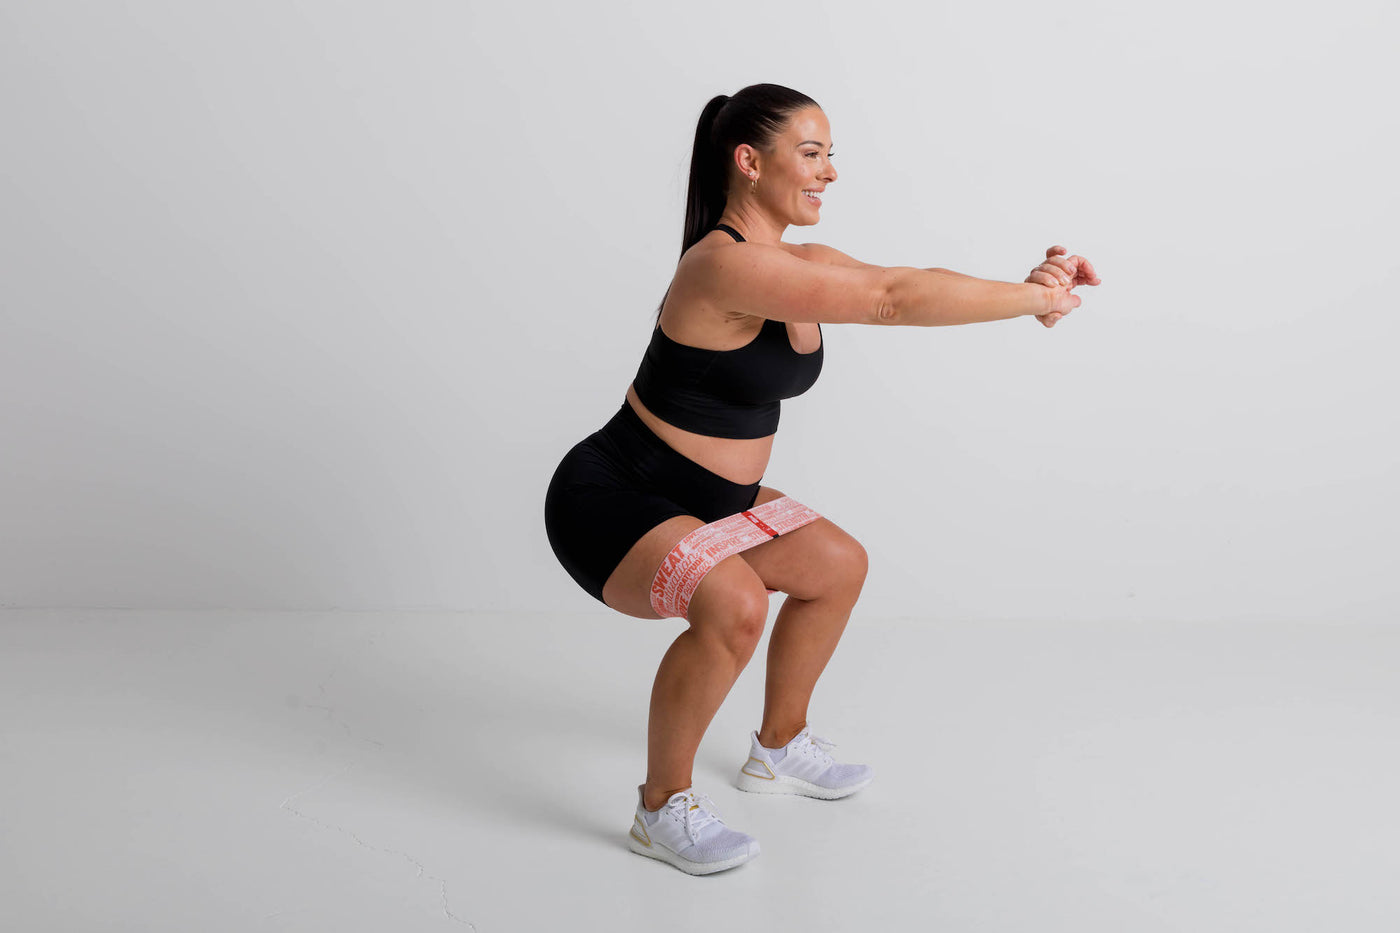 Lower Body Workout You Can Do At Home - No Equipment Necessary